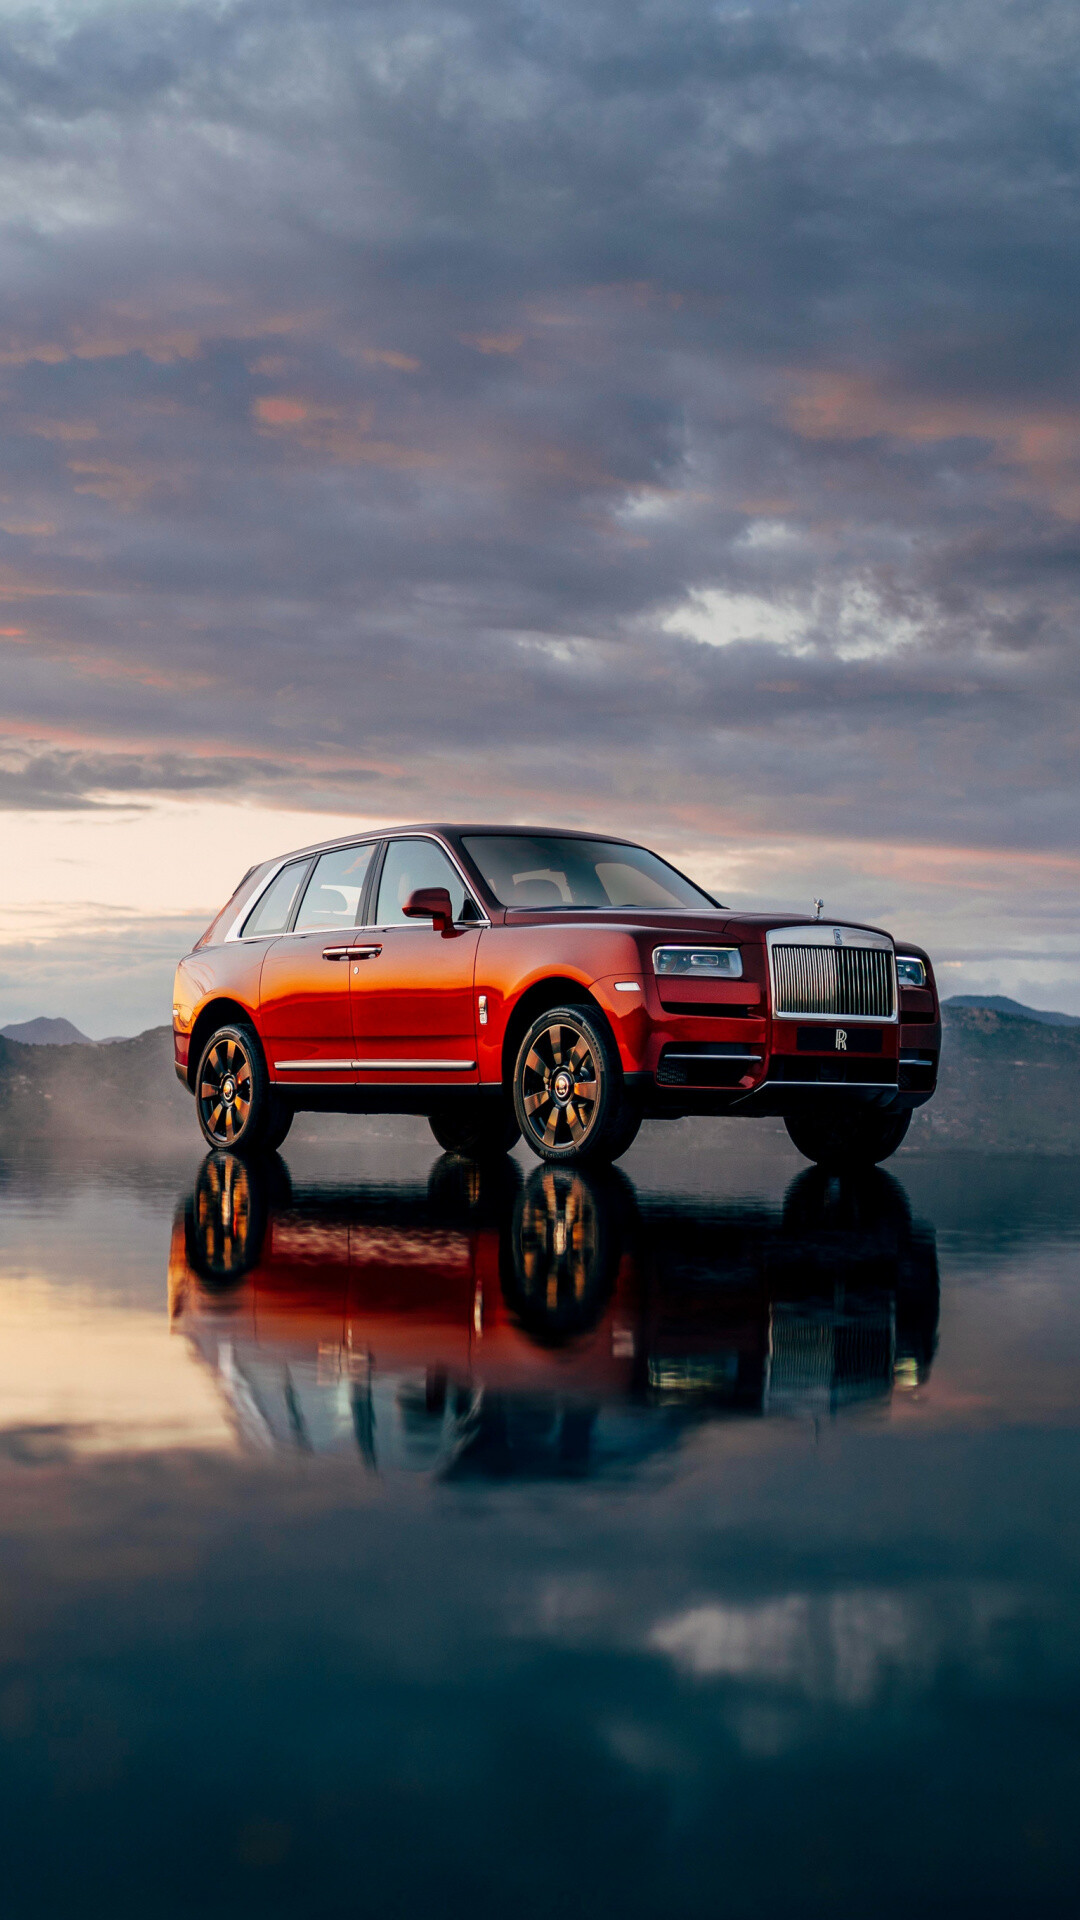 Rolls-Royce: Off-road, Model Cullinan, unveiled in May 2018 at the Concorso d'Eleganza Villa d'Este. 1080x1920 Full HD Background.